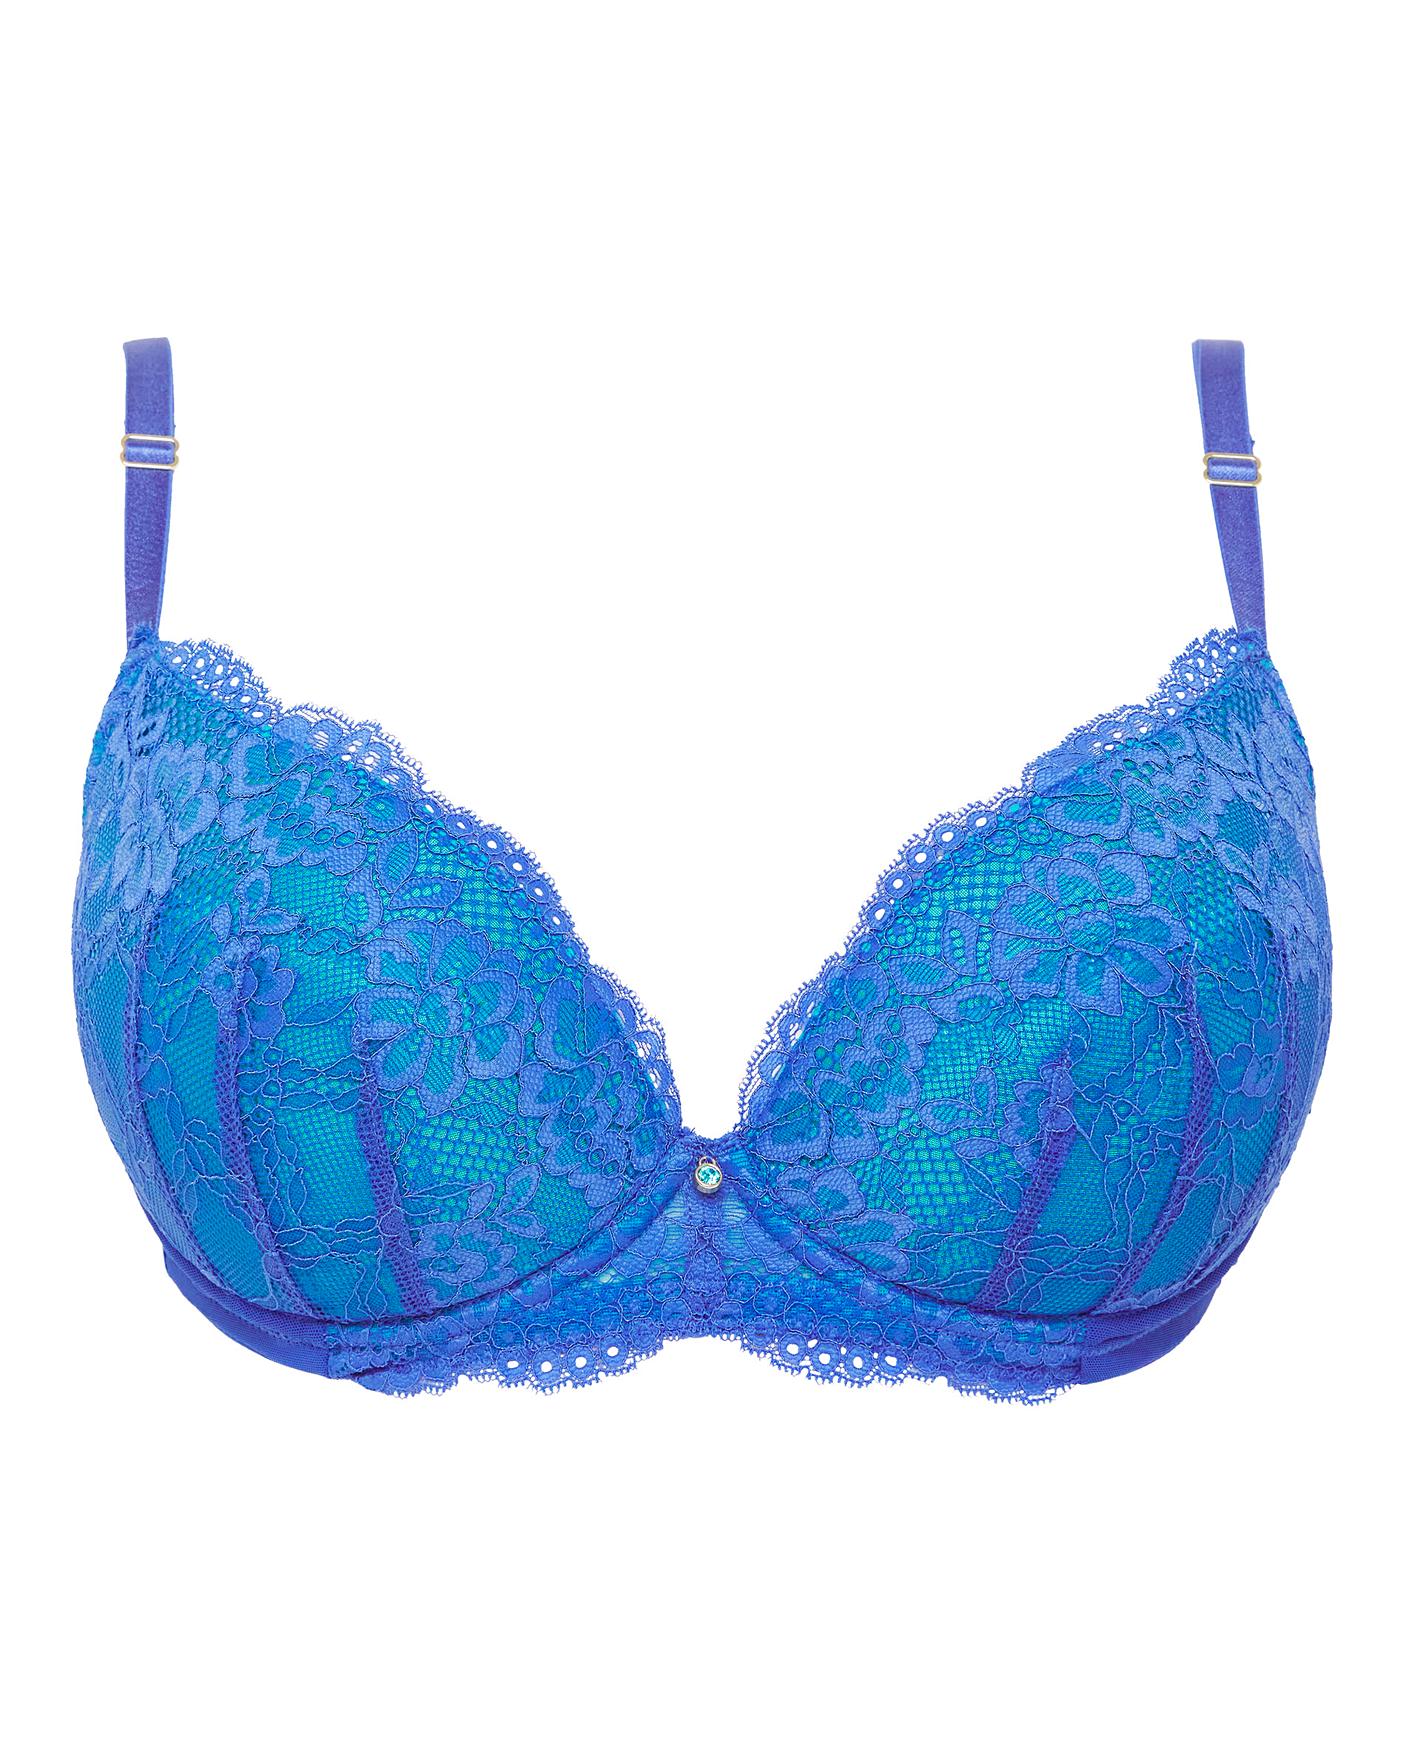 Bright Blue Ann Summers Sexy Lace Planet Plunge Bra